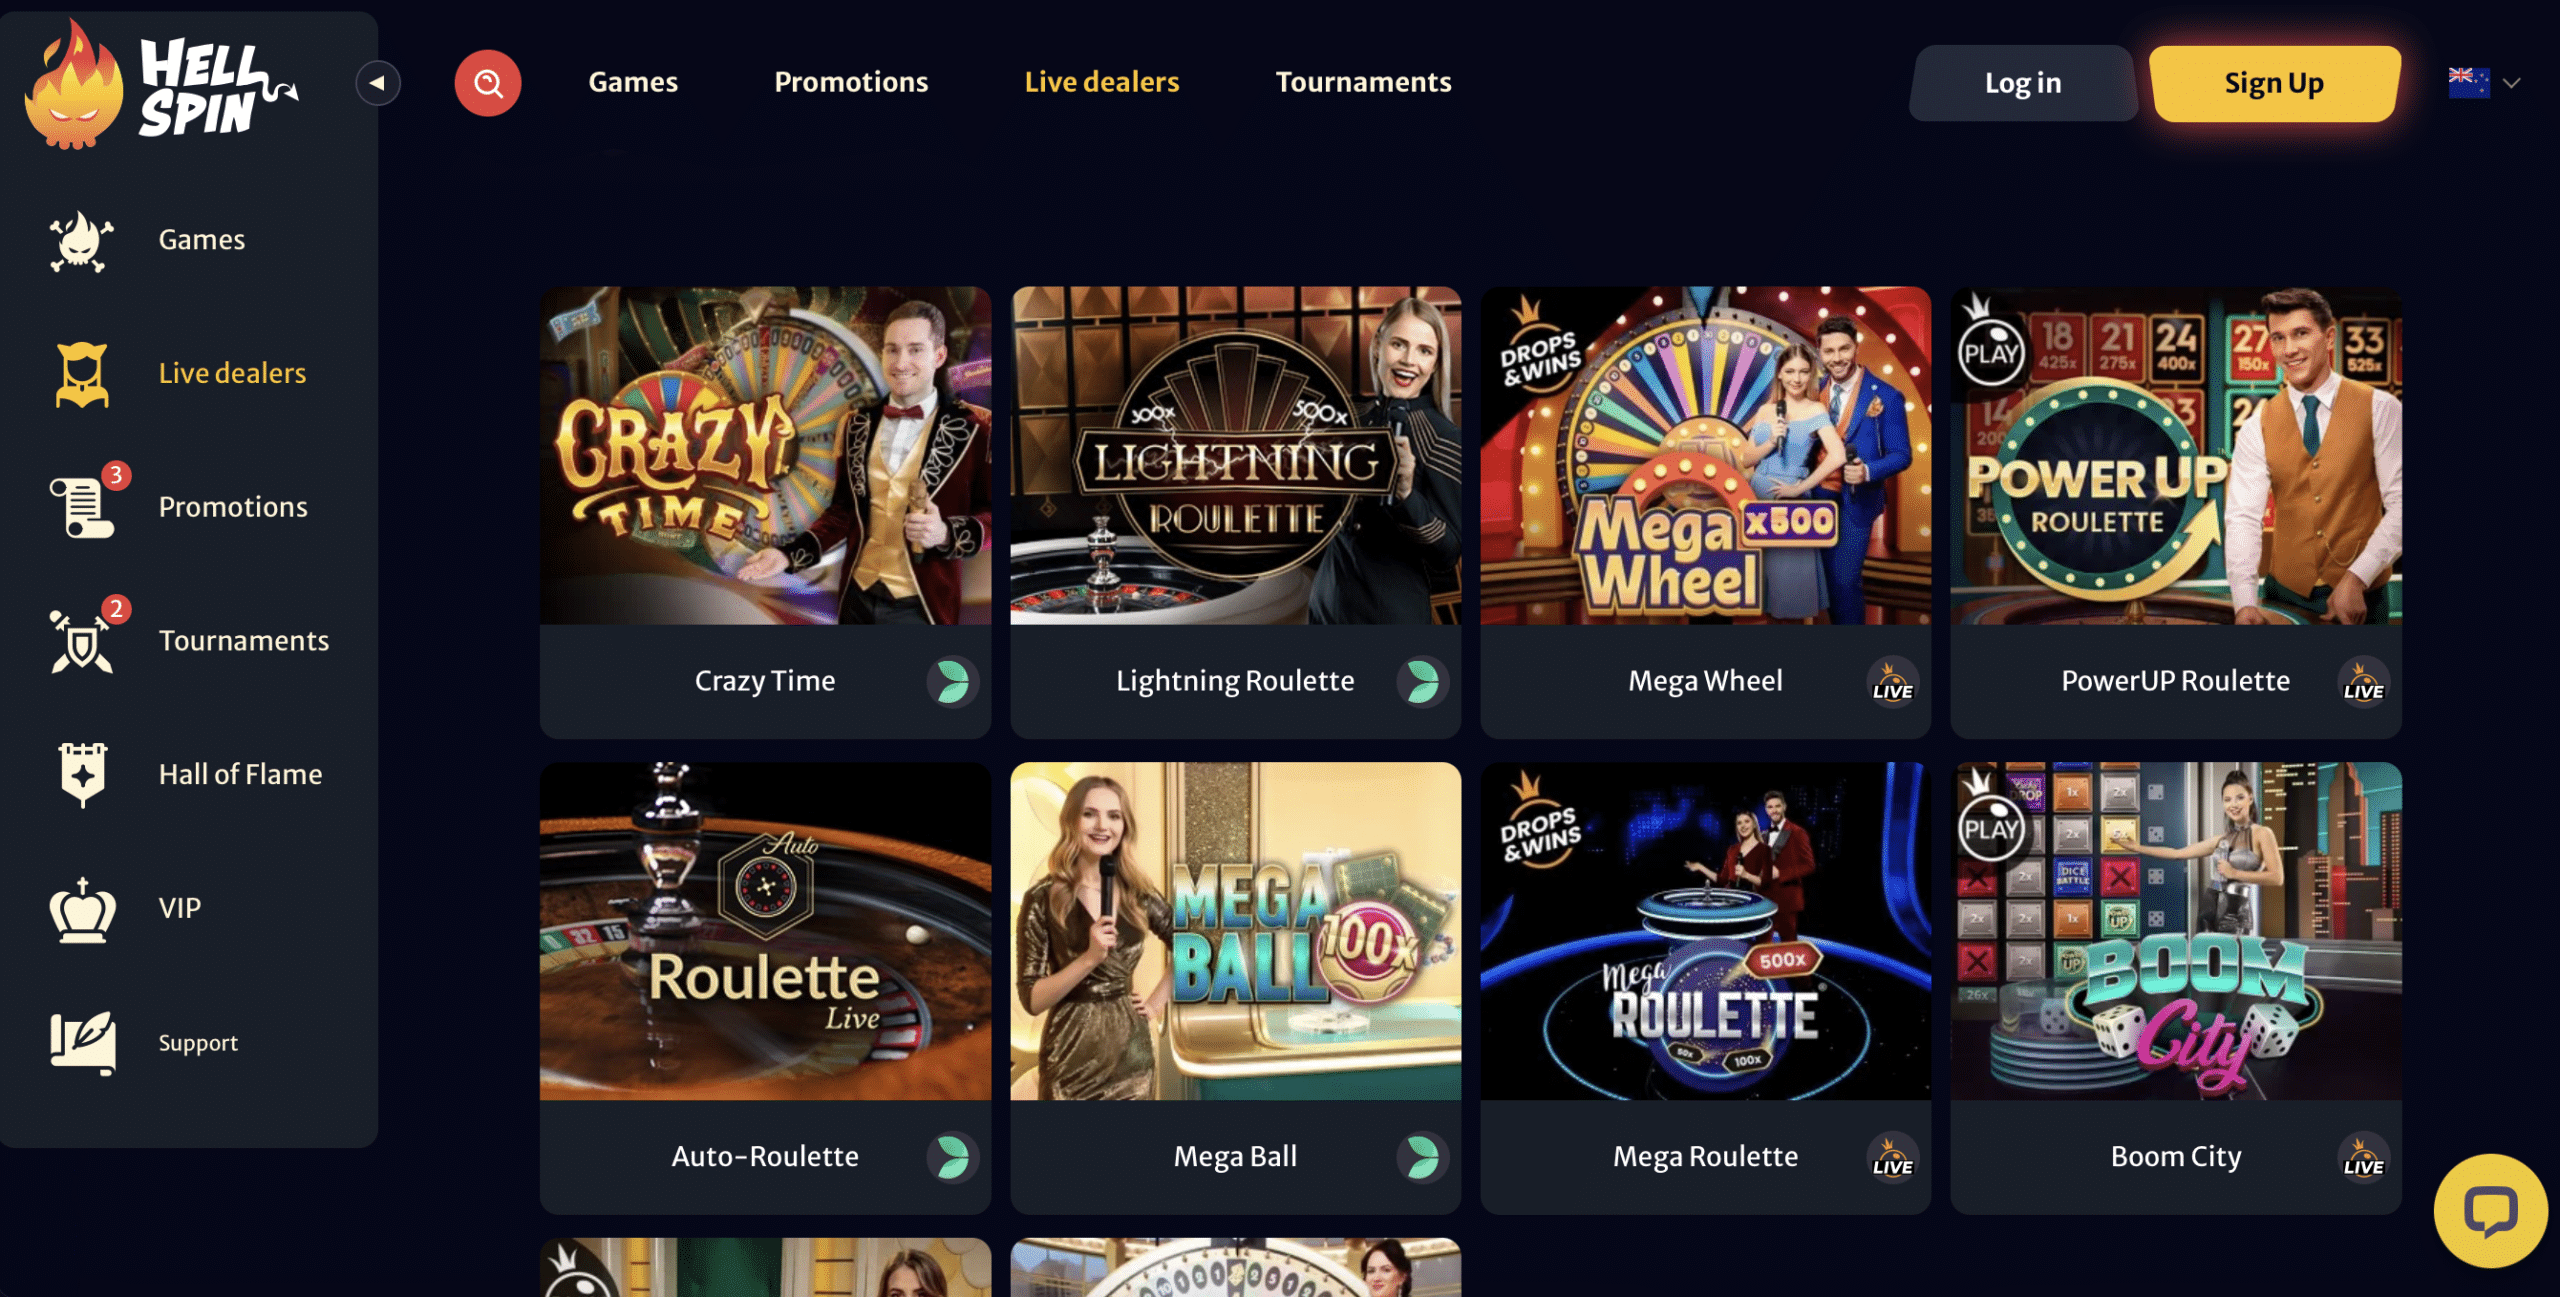 Hell Spin Live Casino